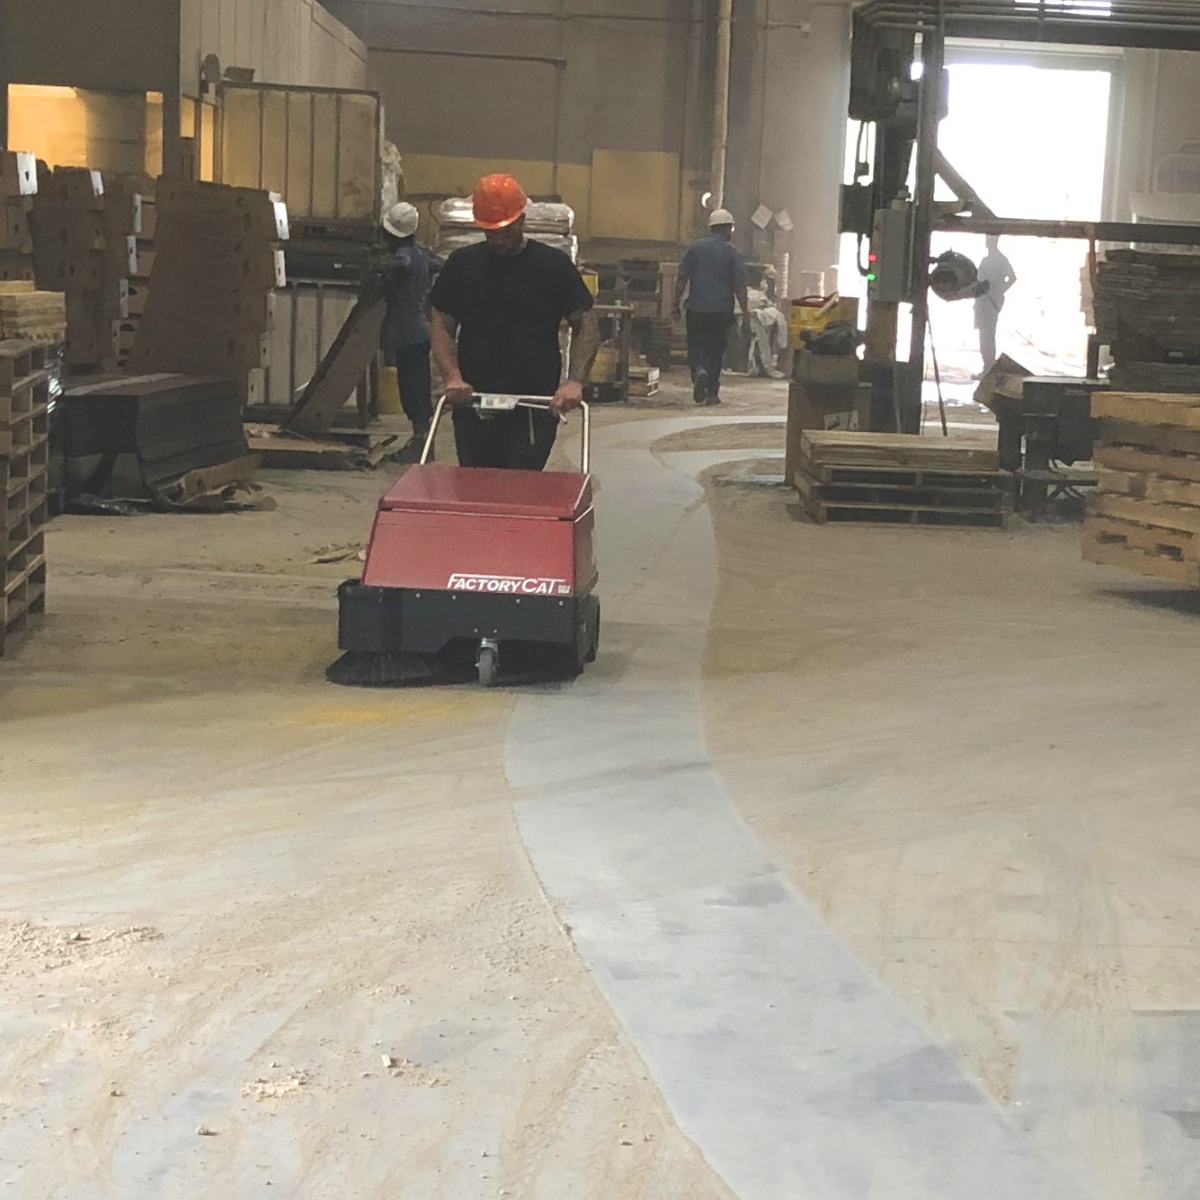 Factory Cat's Floor Sweepers are built to sweep factories: dirt, dust, metal shavings, foundry sand, bolts, paper, wood, whatever there is. Factory Cat's are compact, not light-duty.